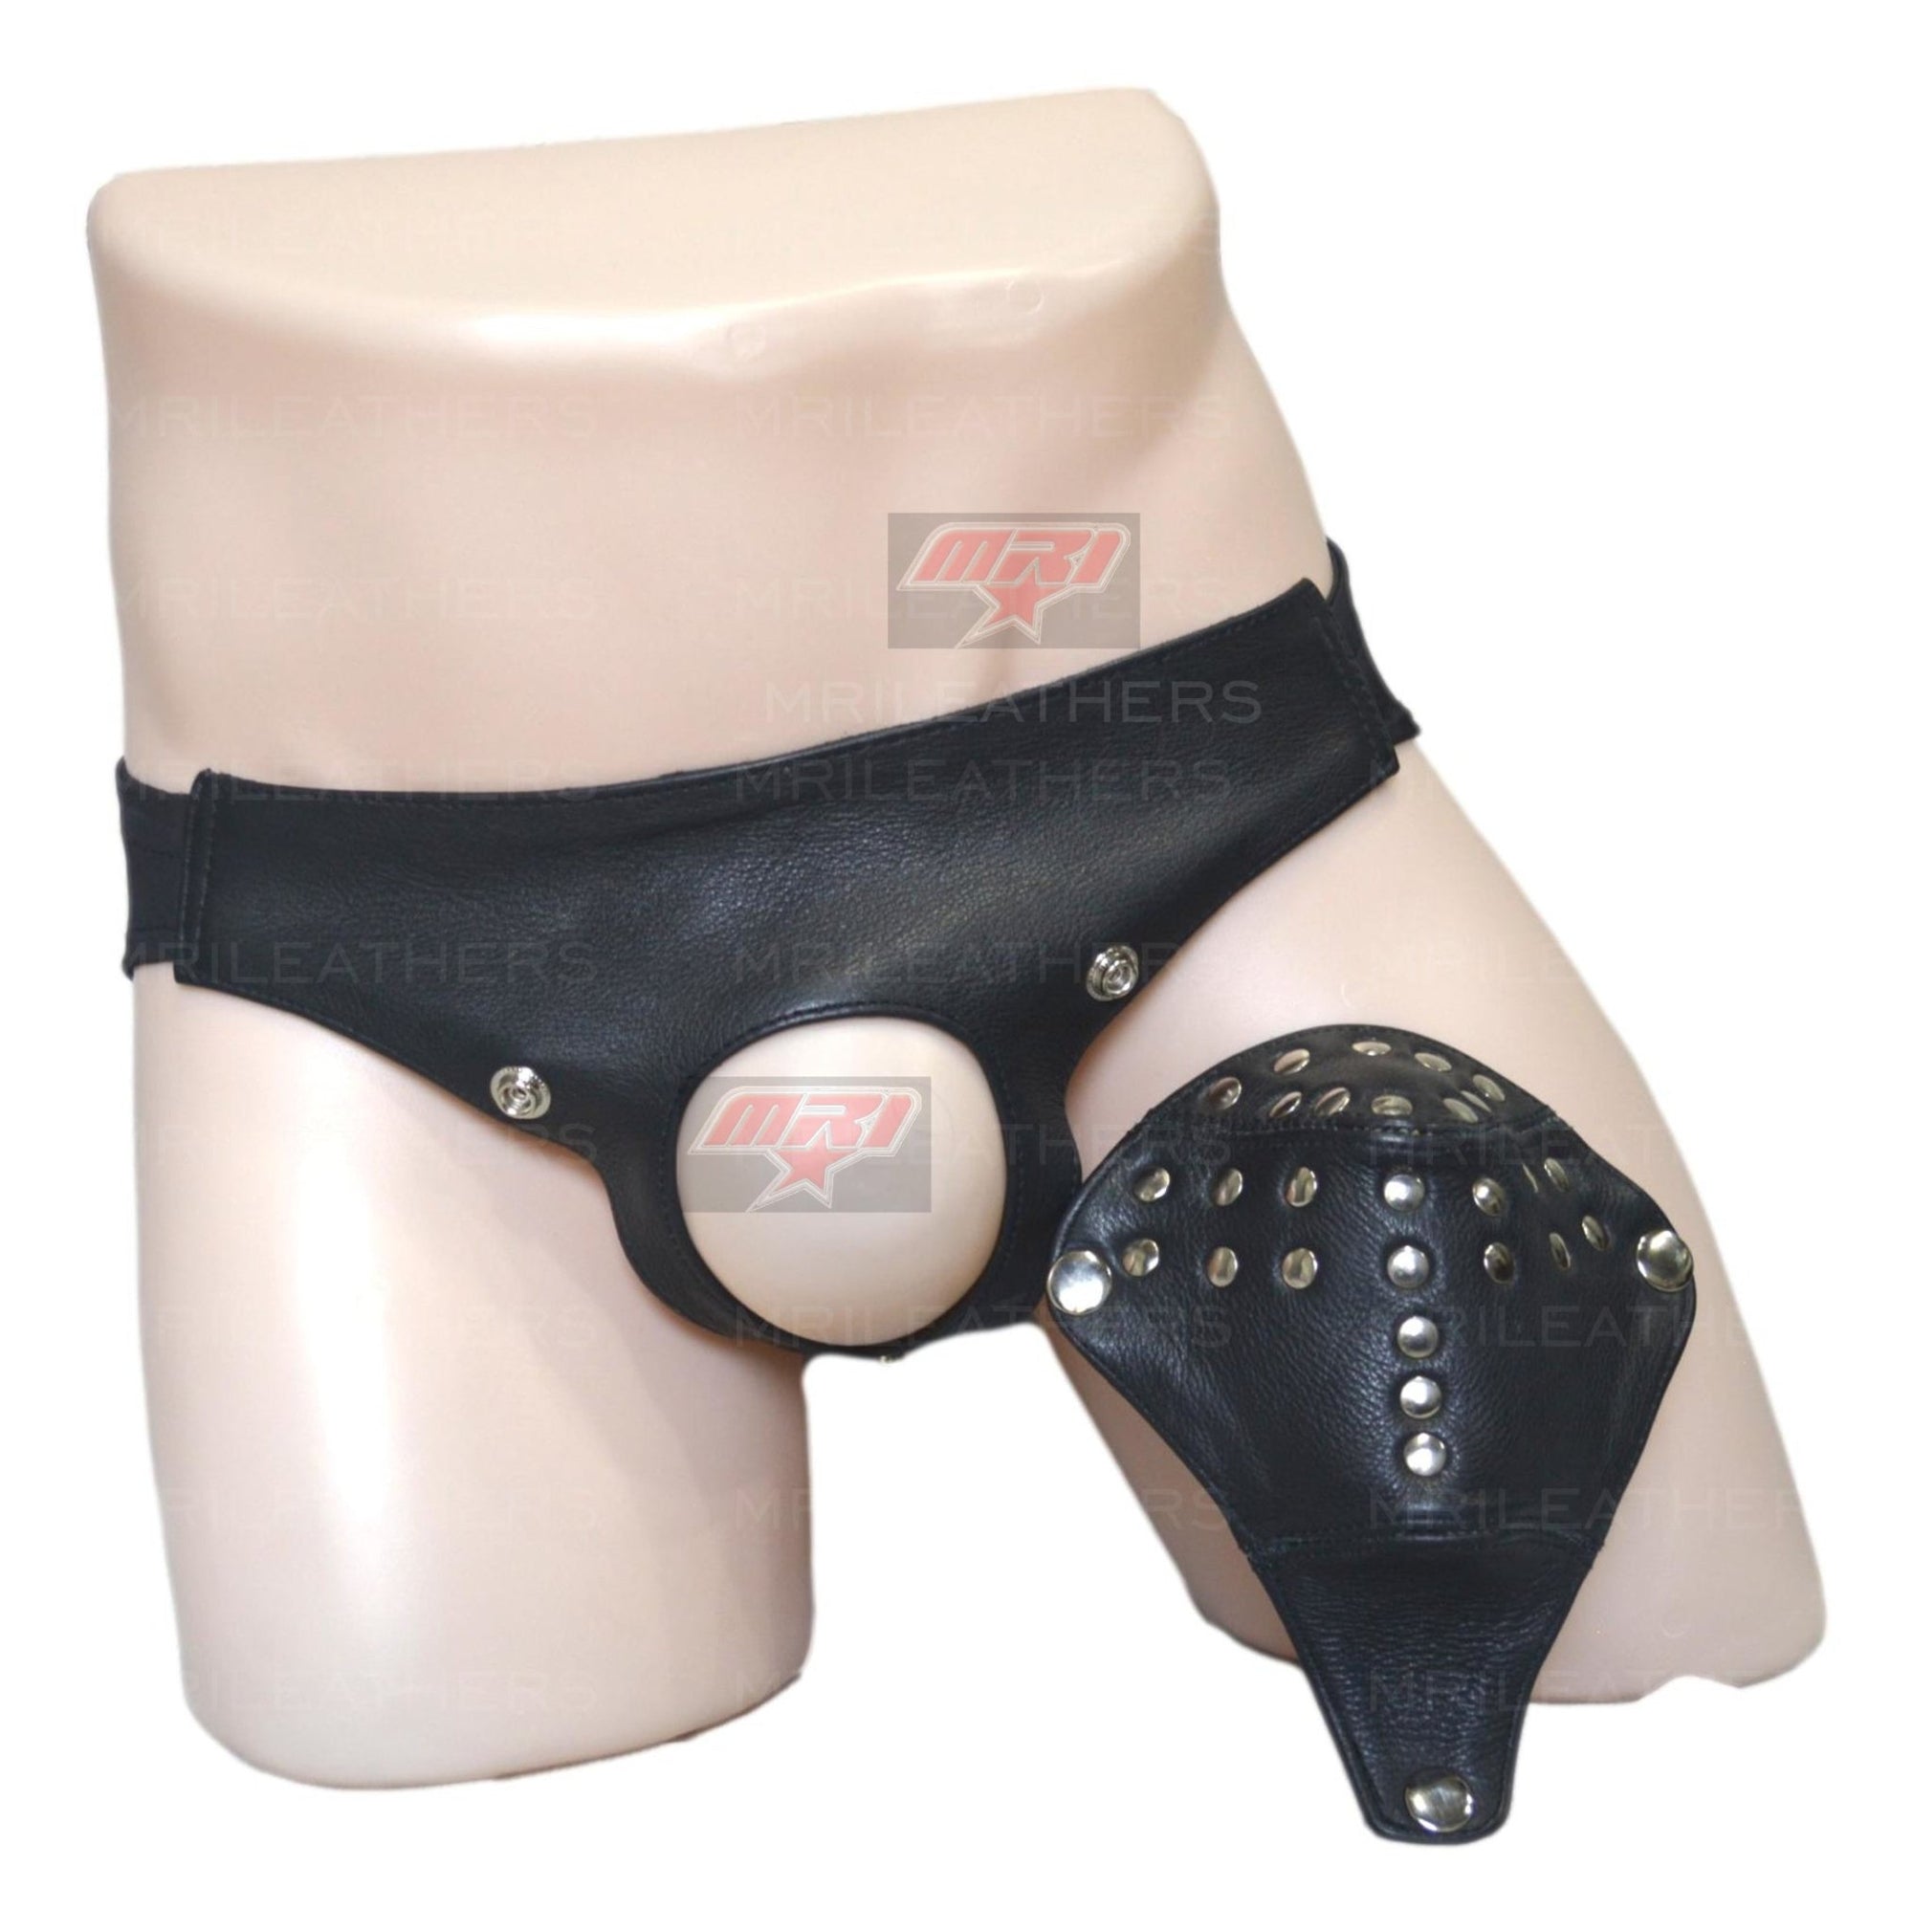 Men Leather Jockstrap -jock -thong removable pouch, lined with soft